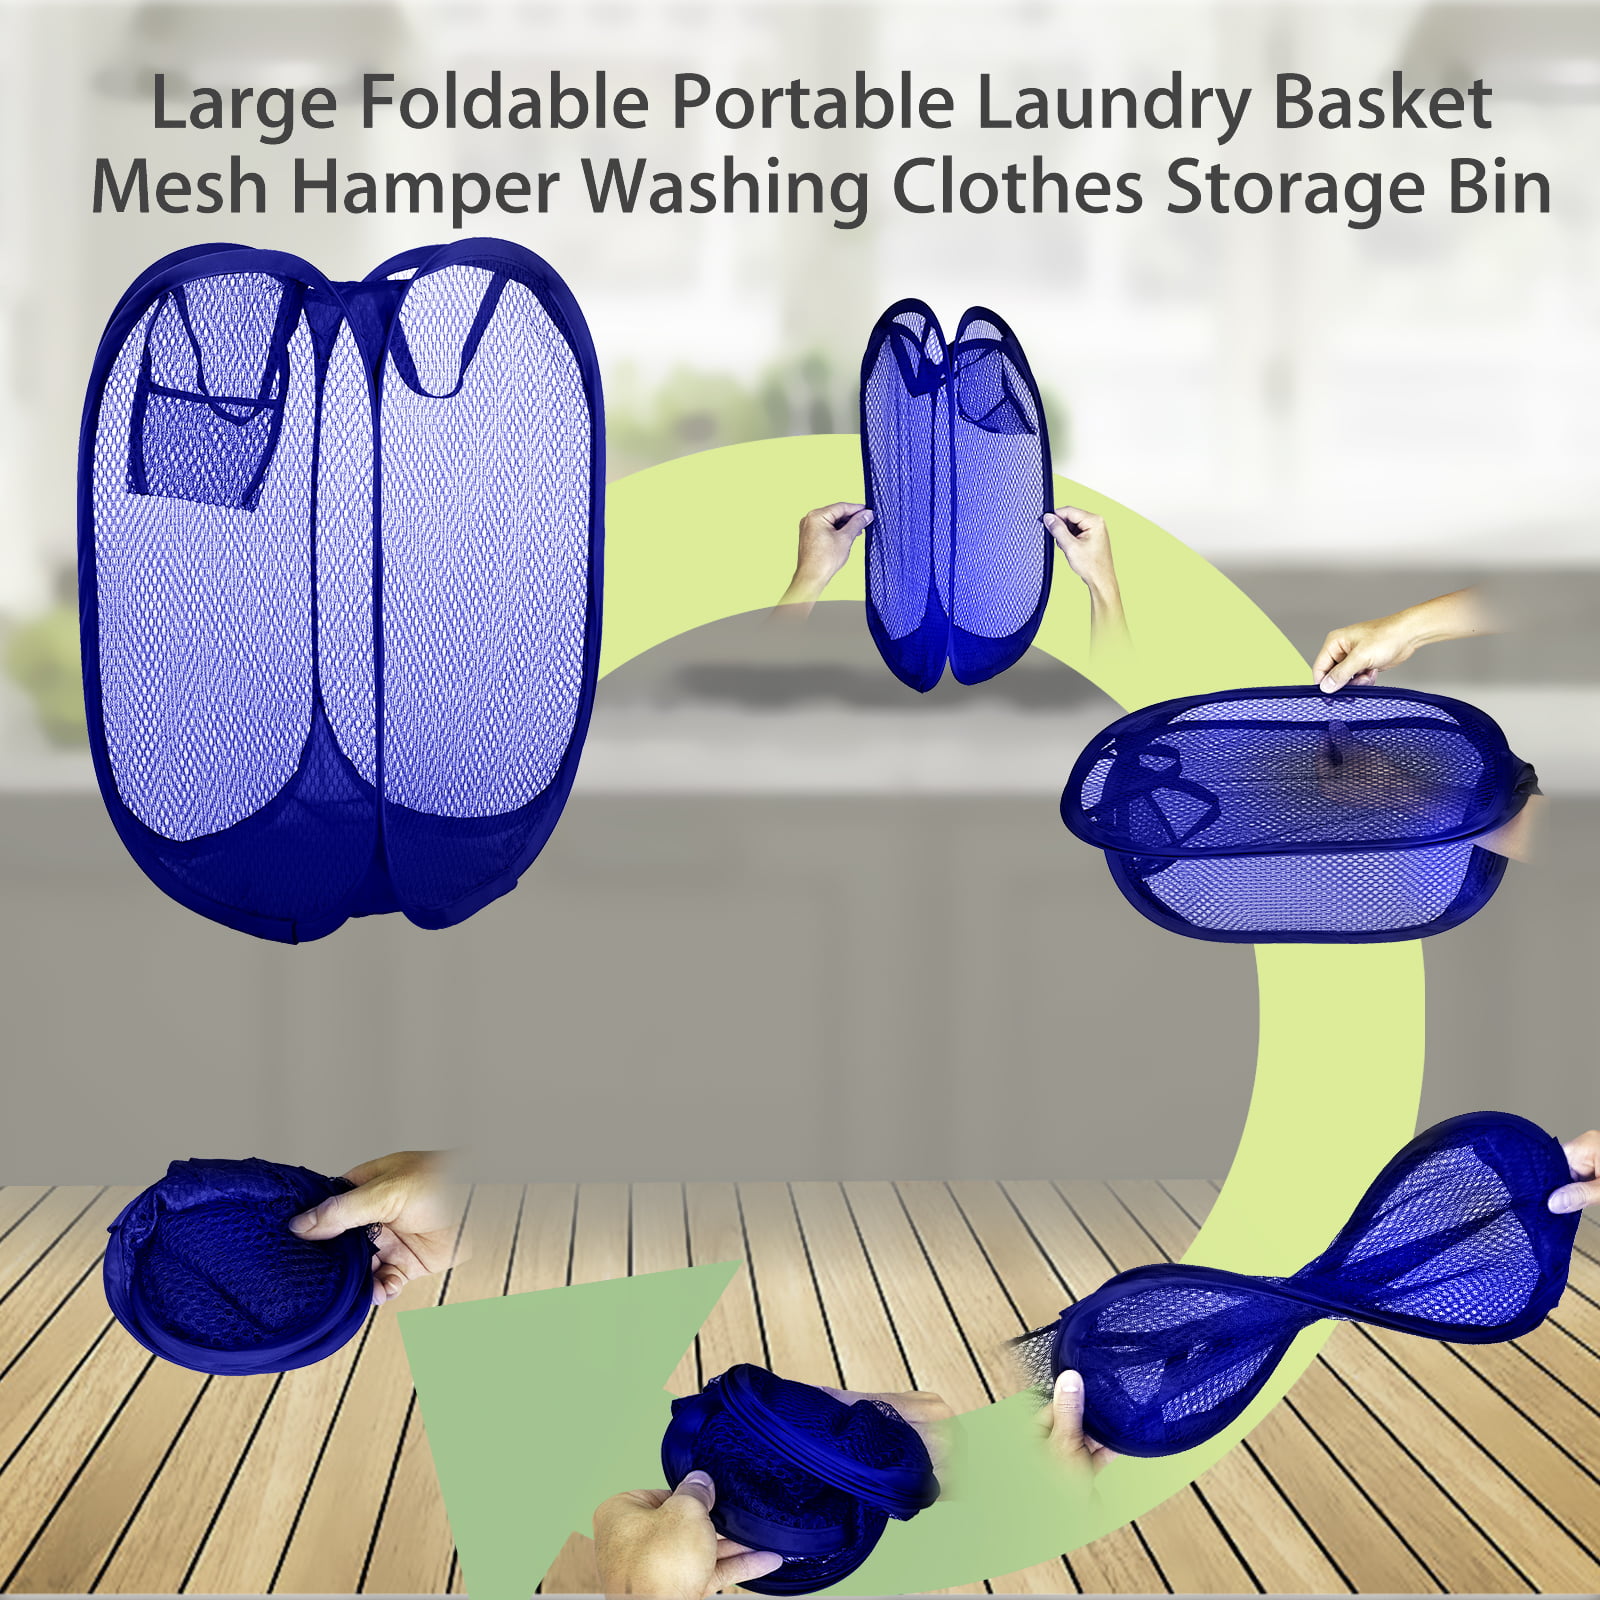 Black TFCFL Mesh Pop Up Laundry Hamper Square Shape Collapsible Design with Handles /& Side Pocket for Clothes /& Laundry